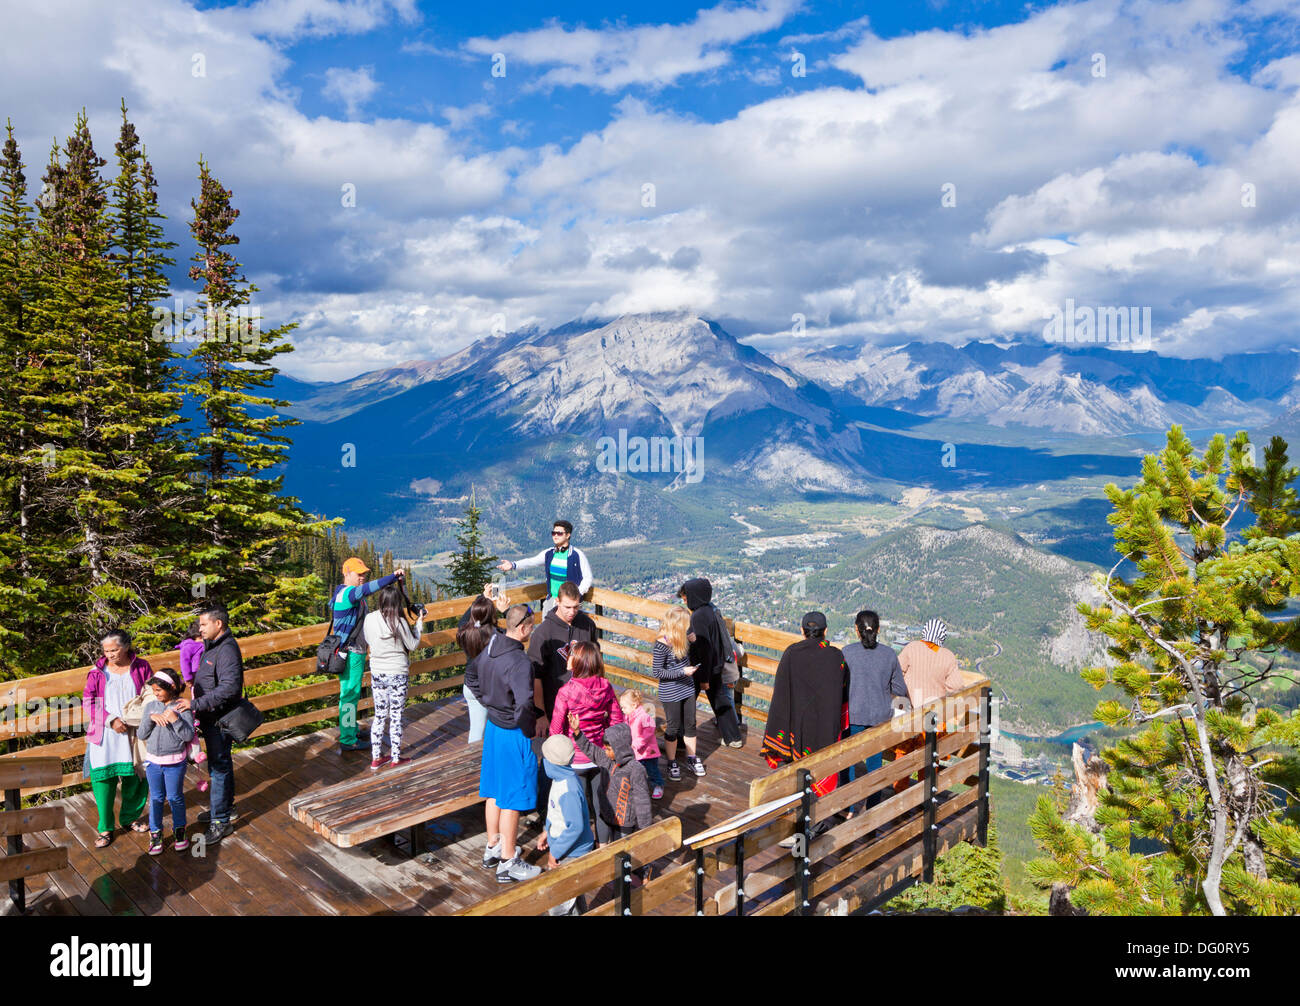 Visitors on a Viewing platform on Sulphur Mountain summit overlooking Banff National park Alberta Canadian Rockies Canada Stock Photo